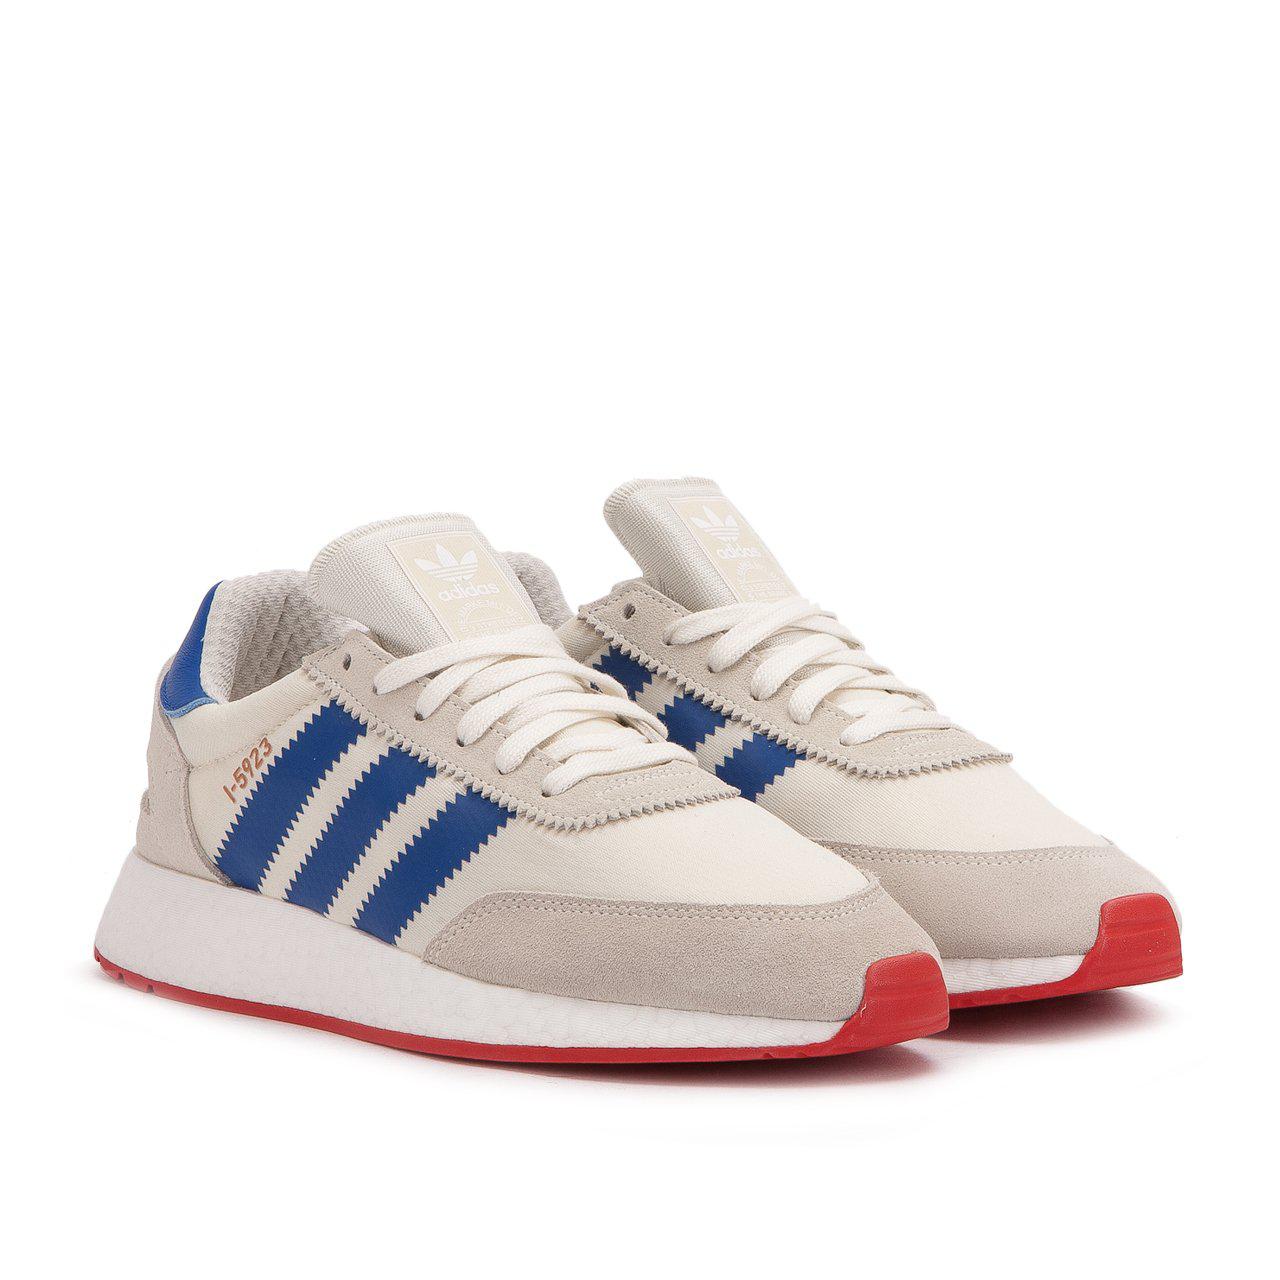 adidas i 5923 pride of the 70s